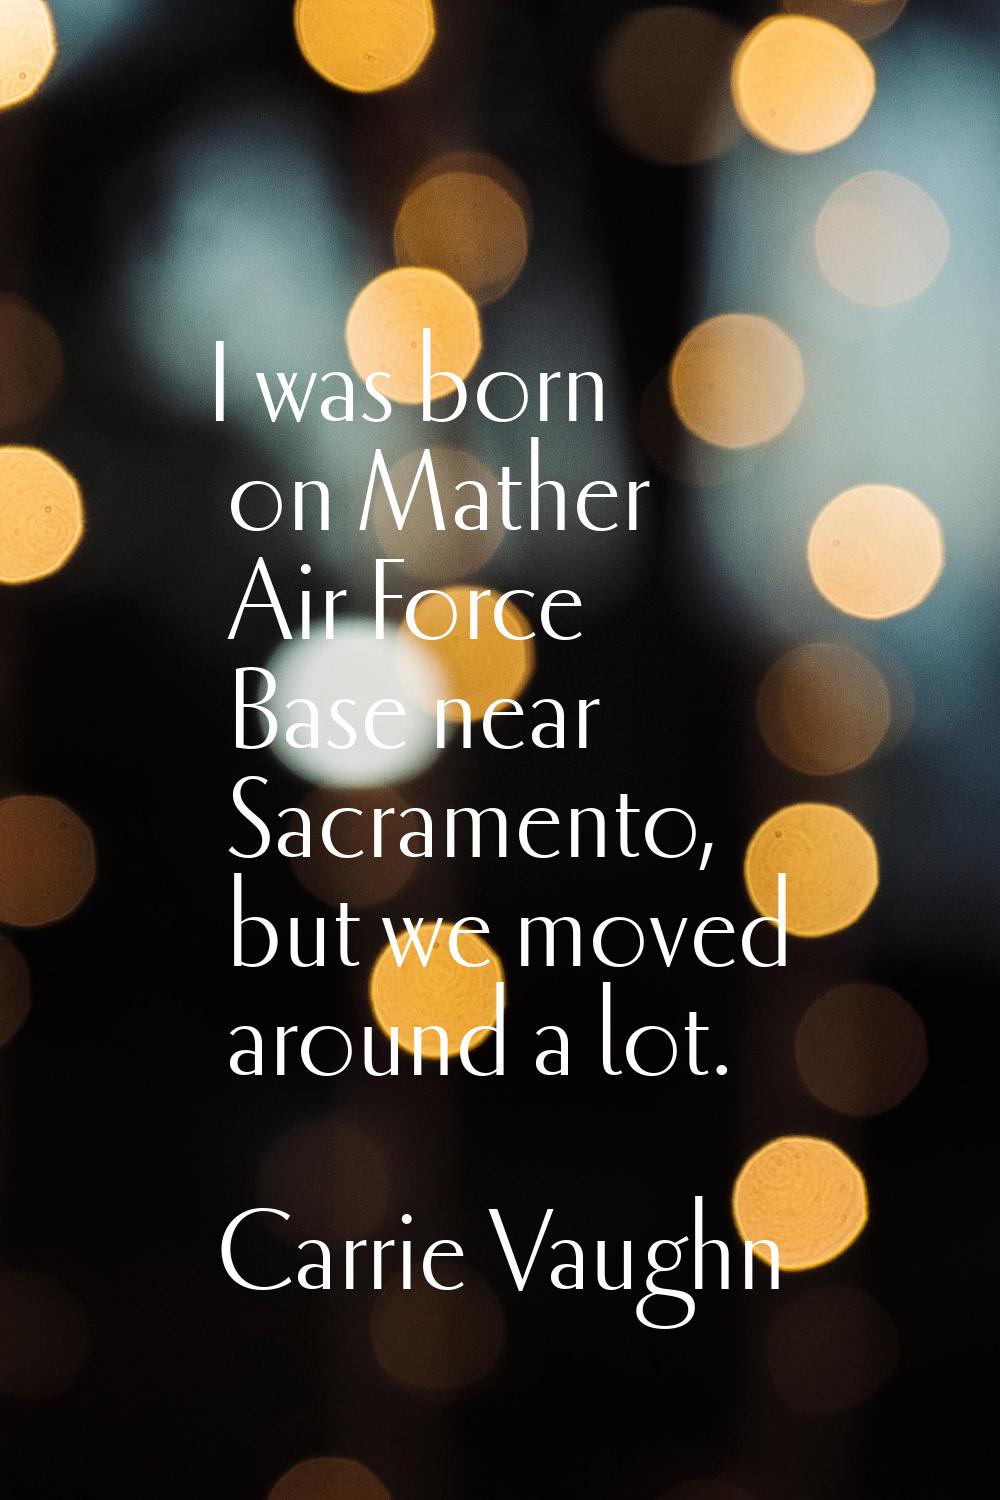 I was born on Mather Air Force Base near Sacramento, but we moved around a lot.